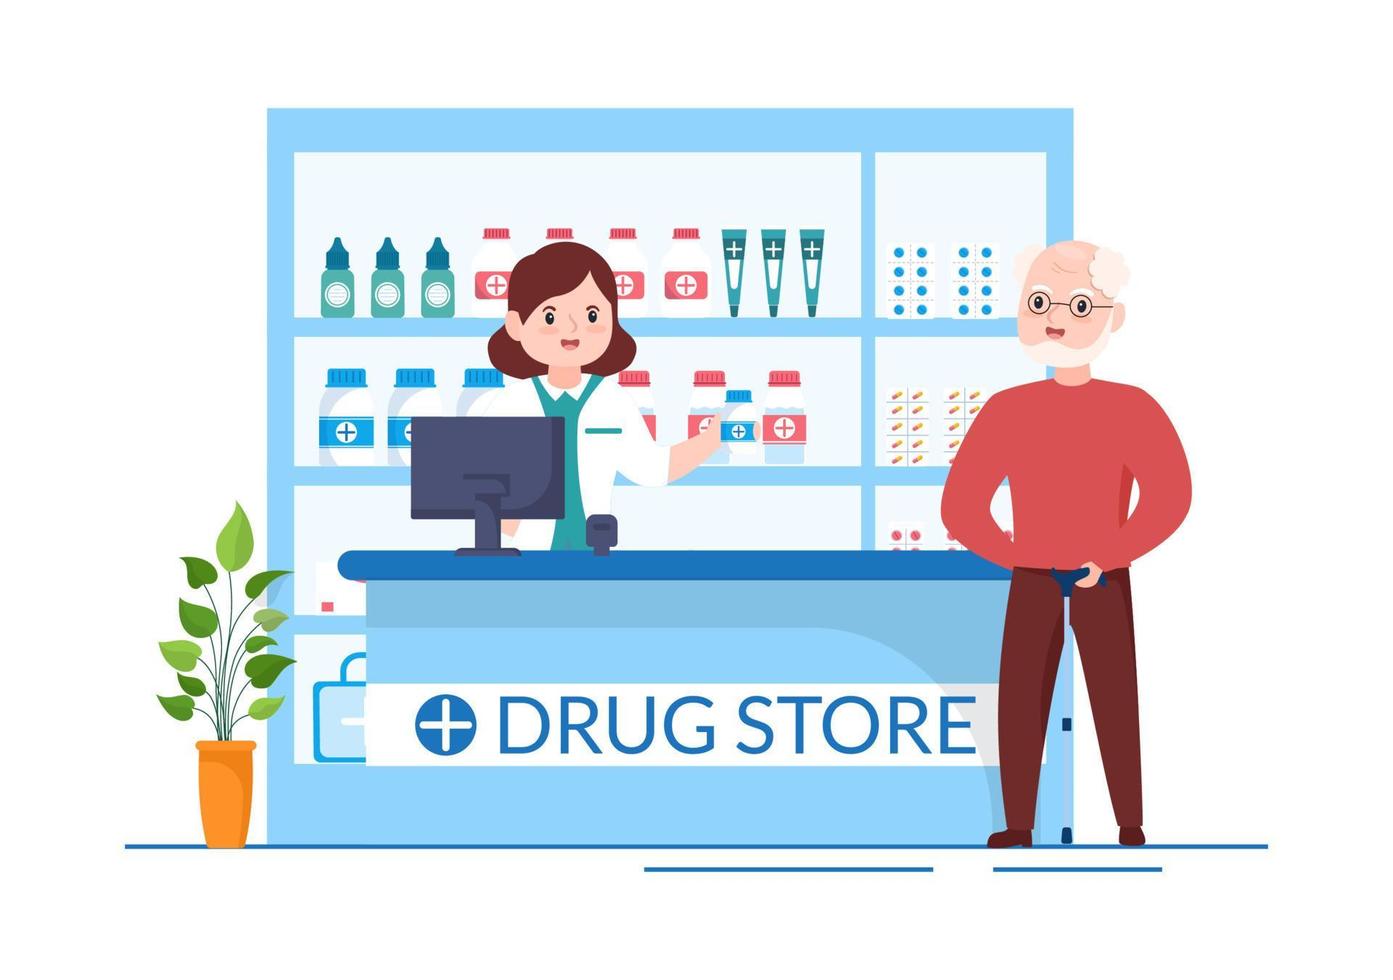 Drug Store Template Hand Drawn Cartoon Flat Illustration Shop for the Sale of Drugs, a Pharmacist, Medicine, Capsules and Bottle vector